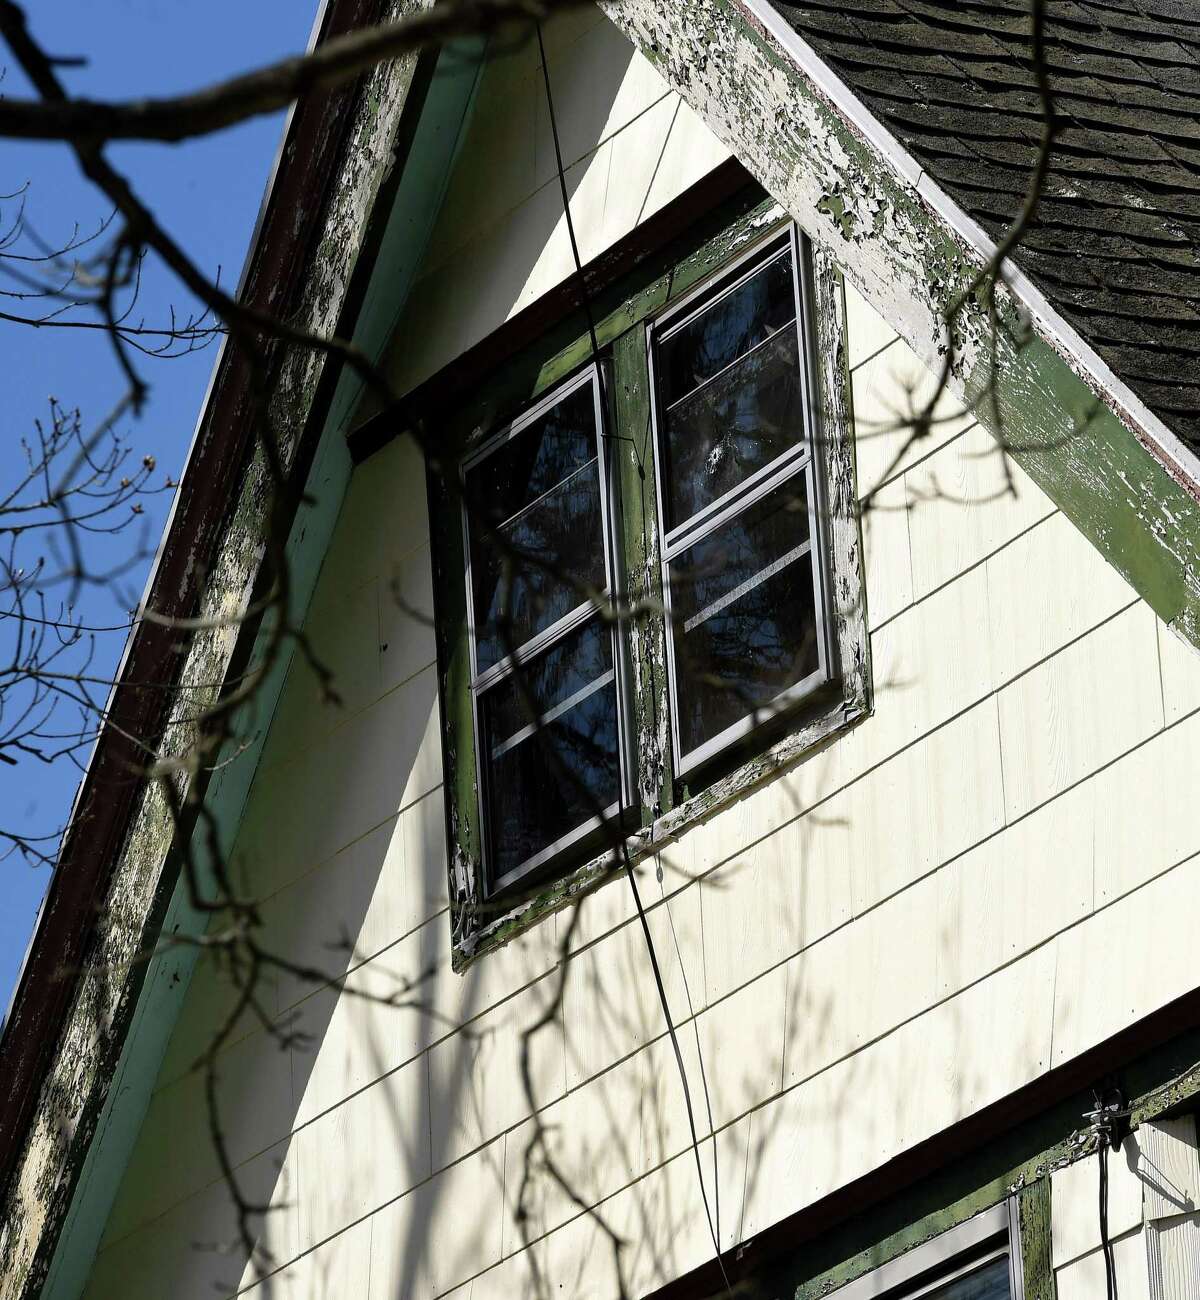 A bullet hole can be seen in the attic window of a house next door to where a shooter fired from a second-floor apartment 241 Main Street in Branford the previous day.